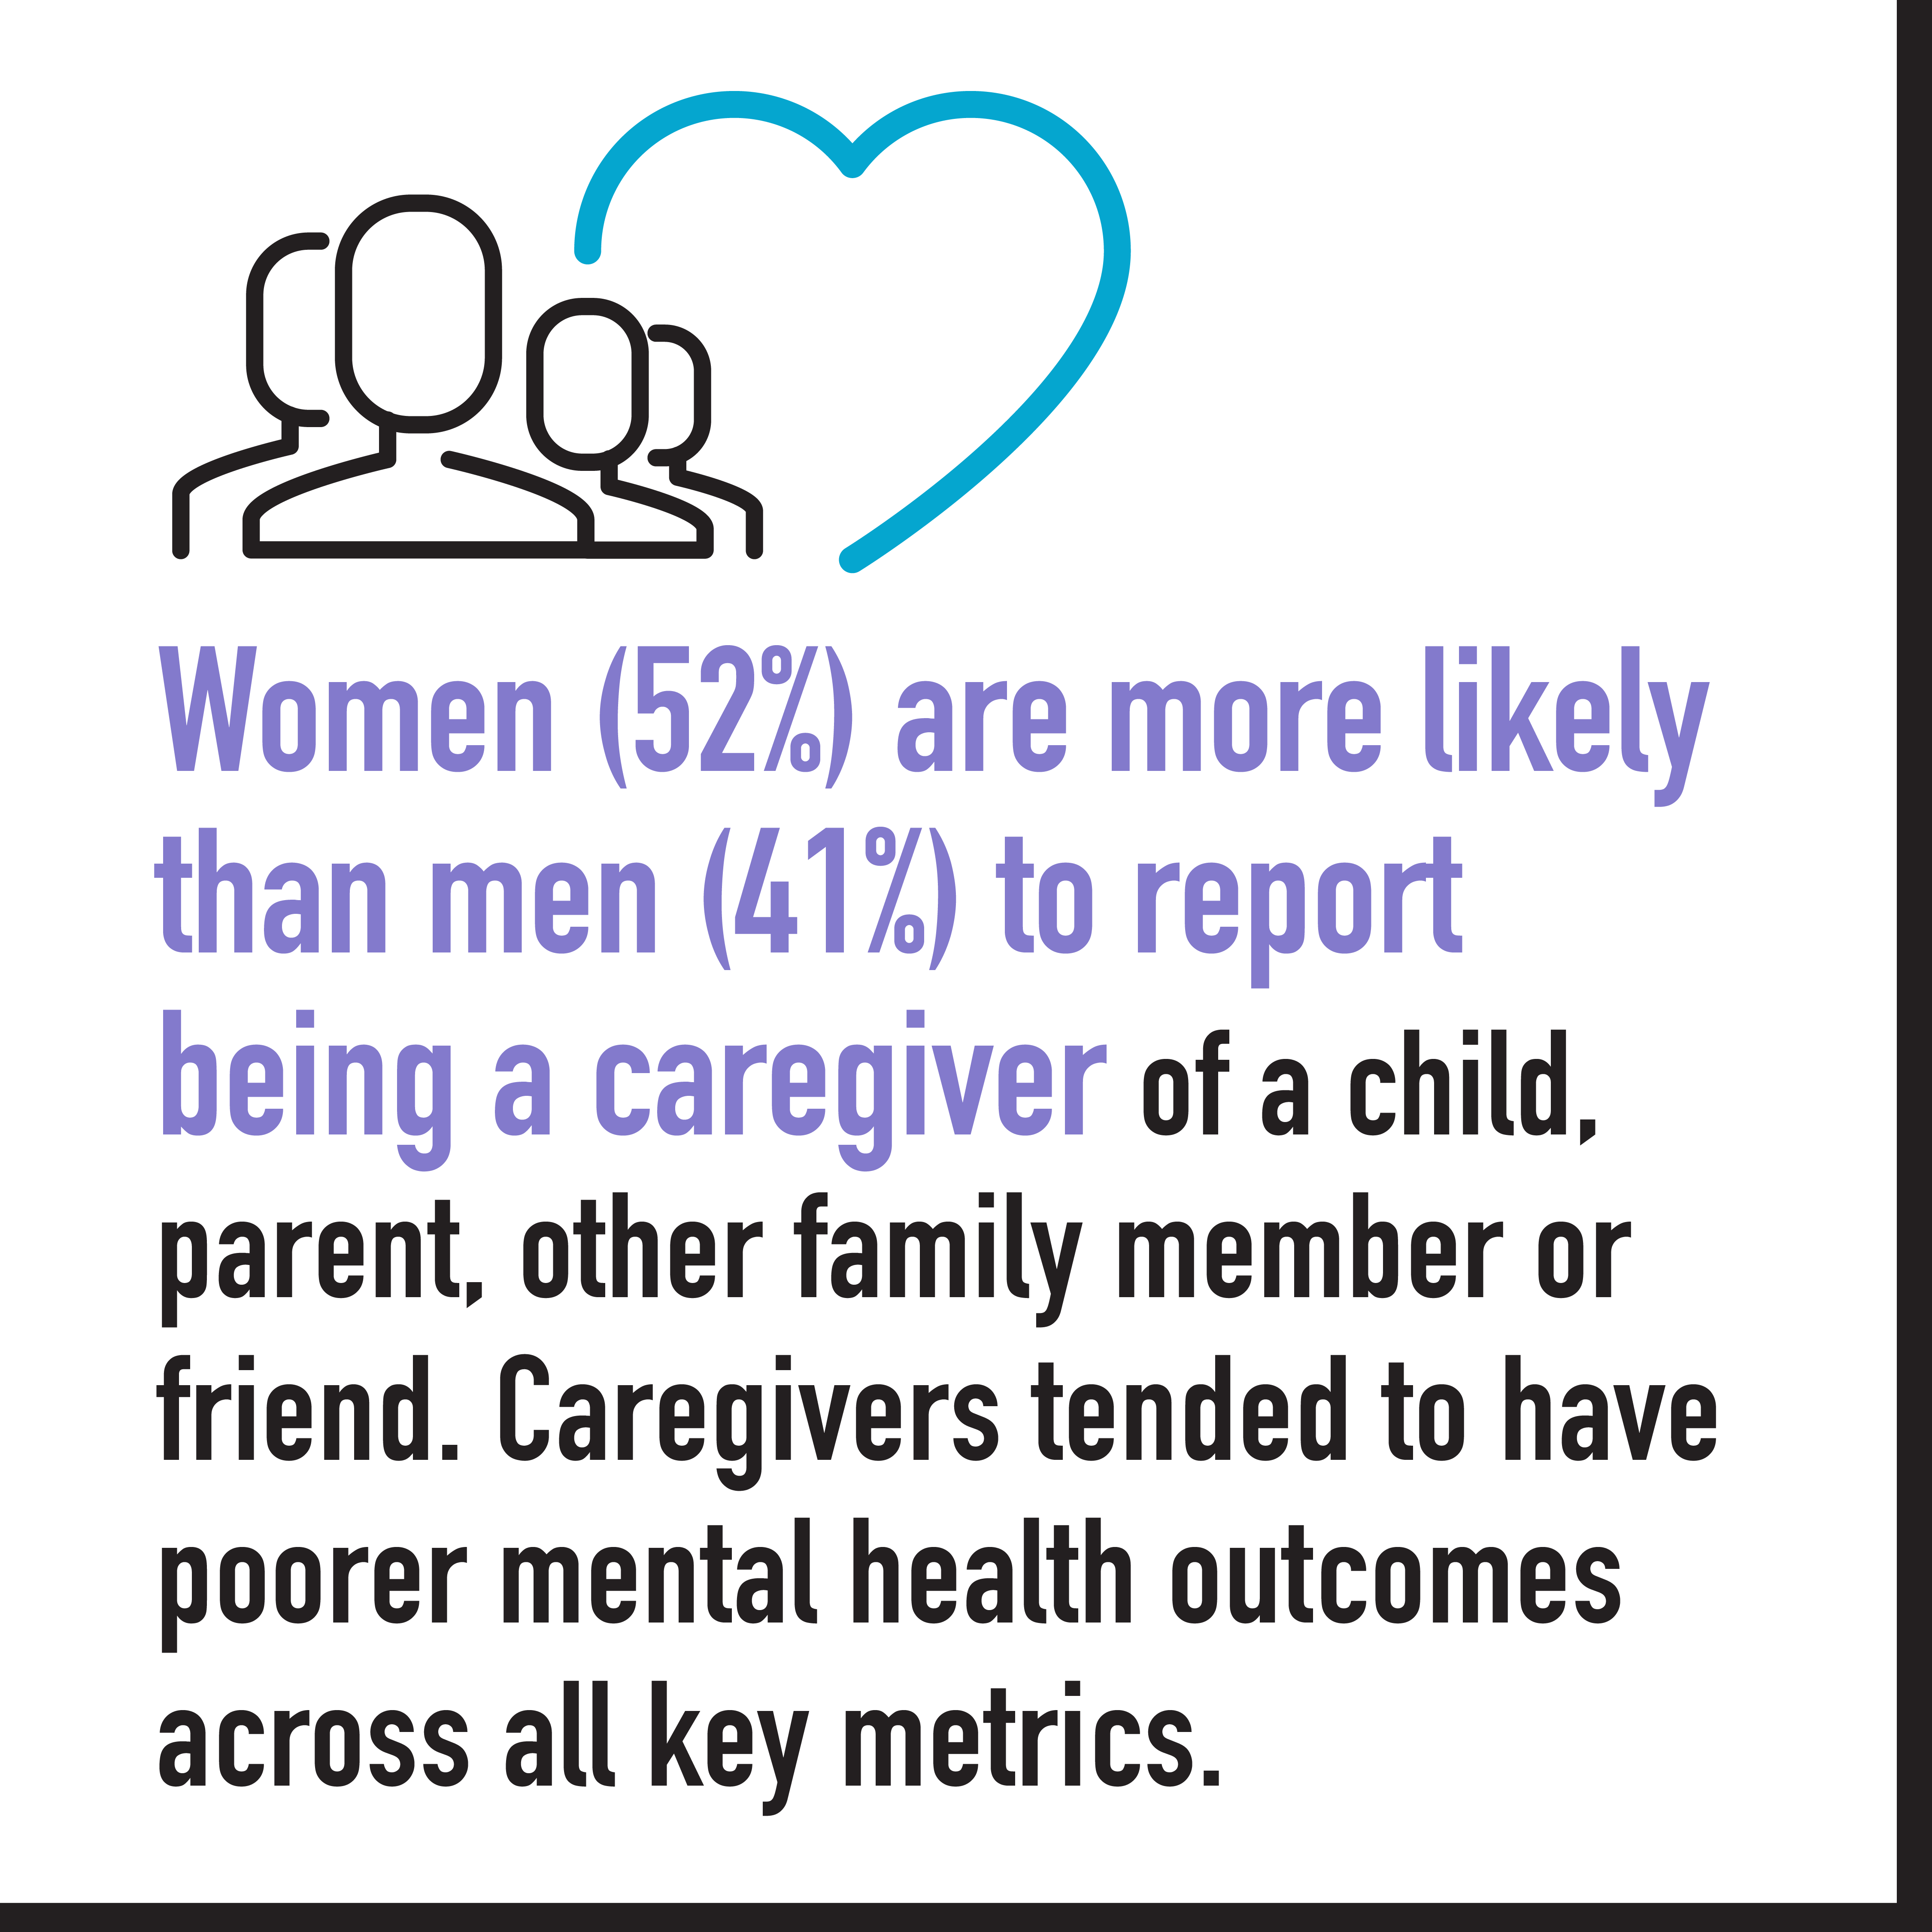 Women (52%) are more likely than men (41%) to report being a caregiver of a child, parent, other family member or friend. Caregivers tended to have poorer mental health outcomes across all key metrics.